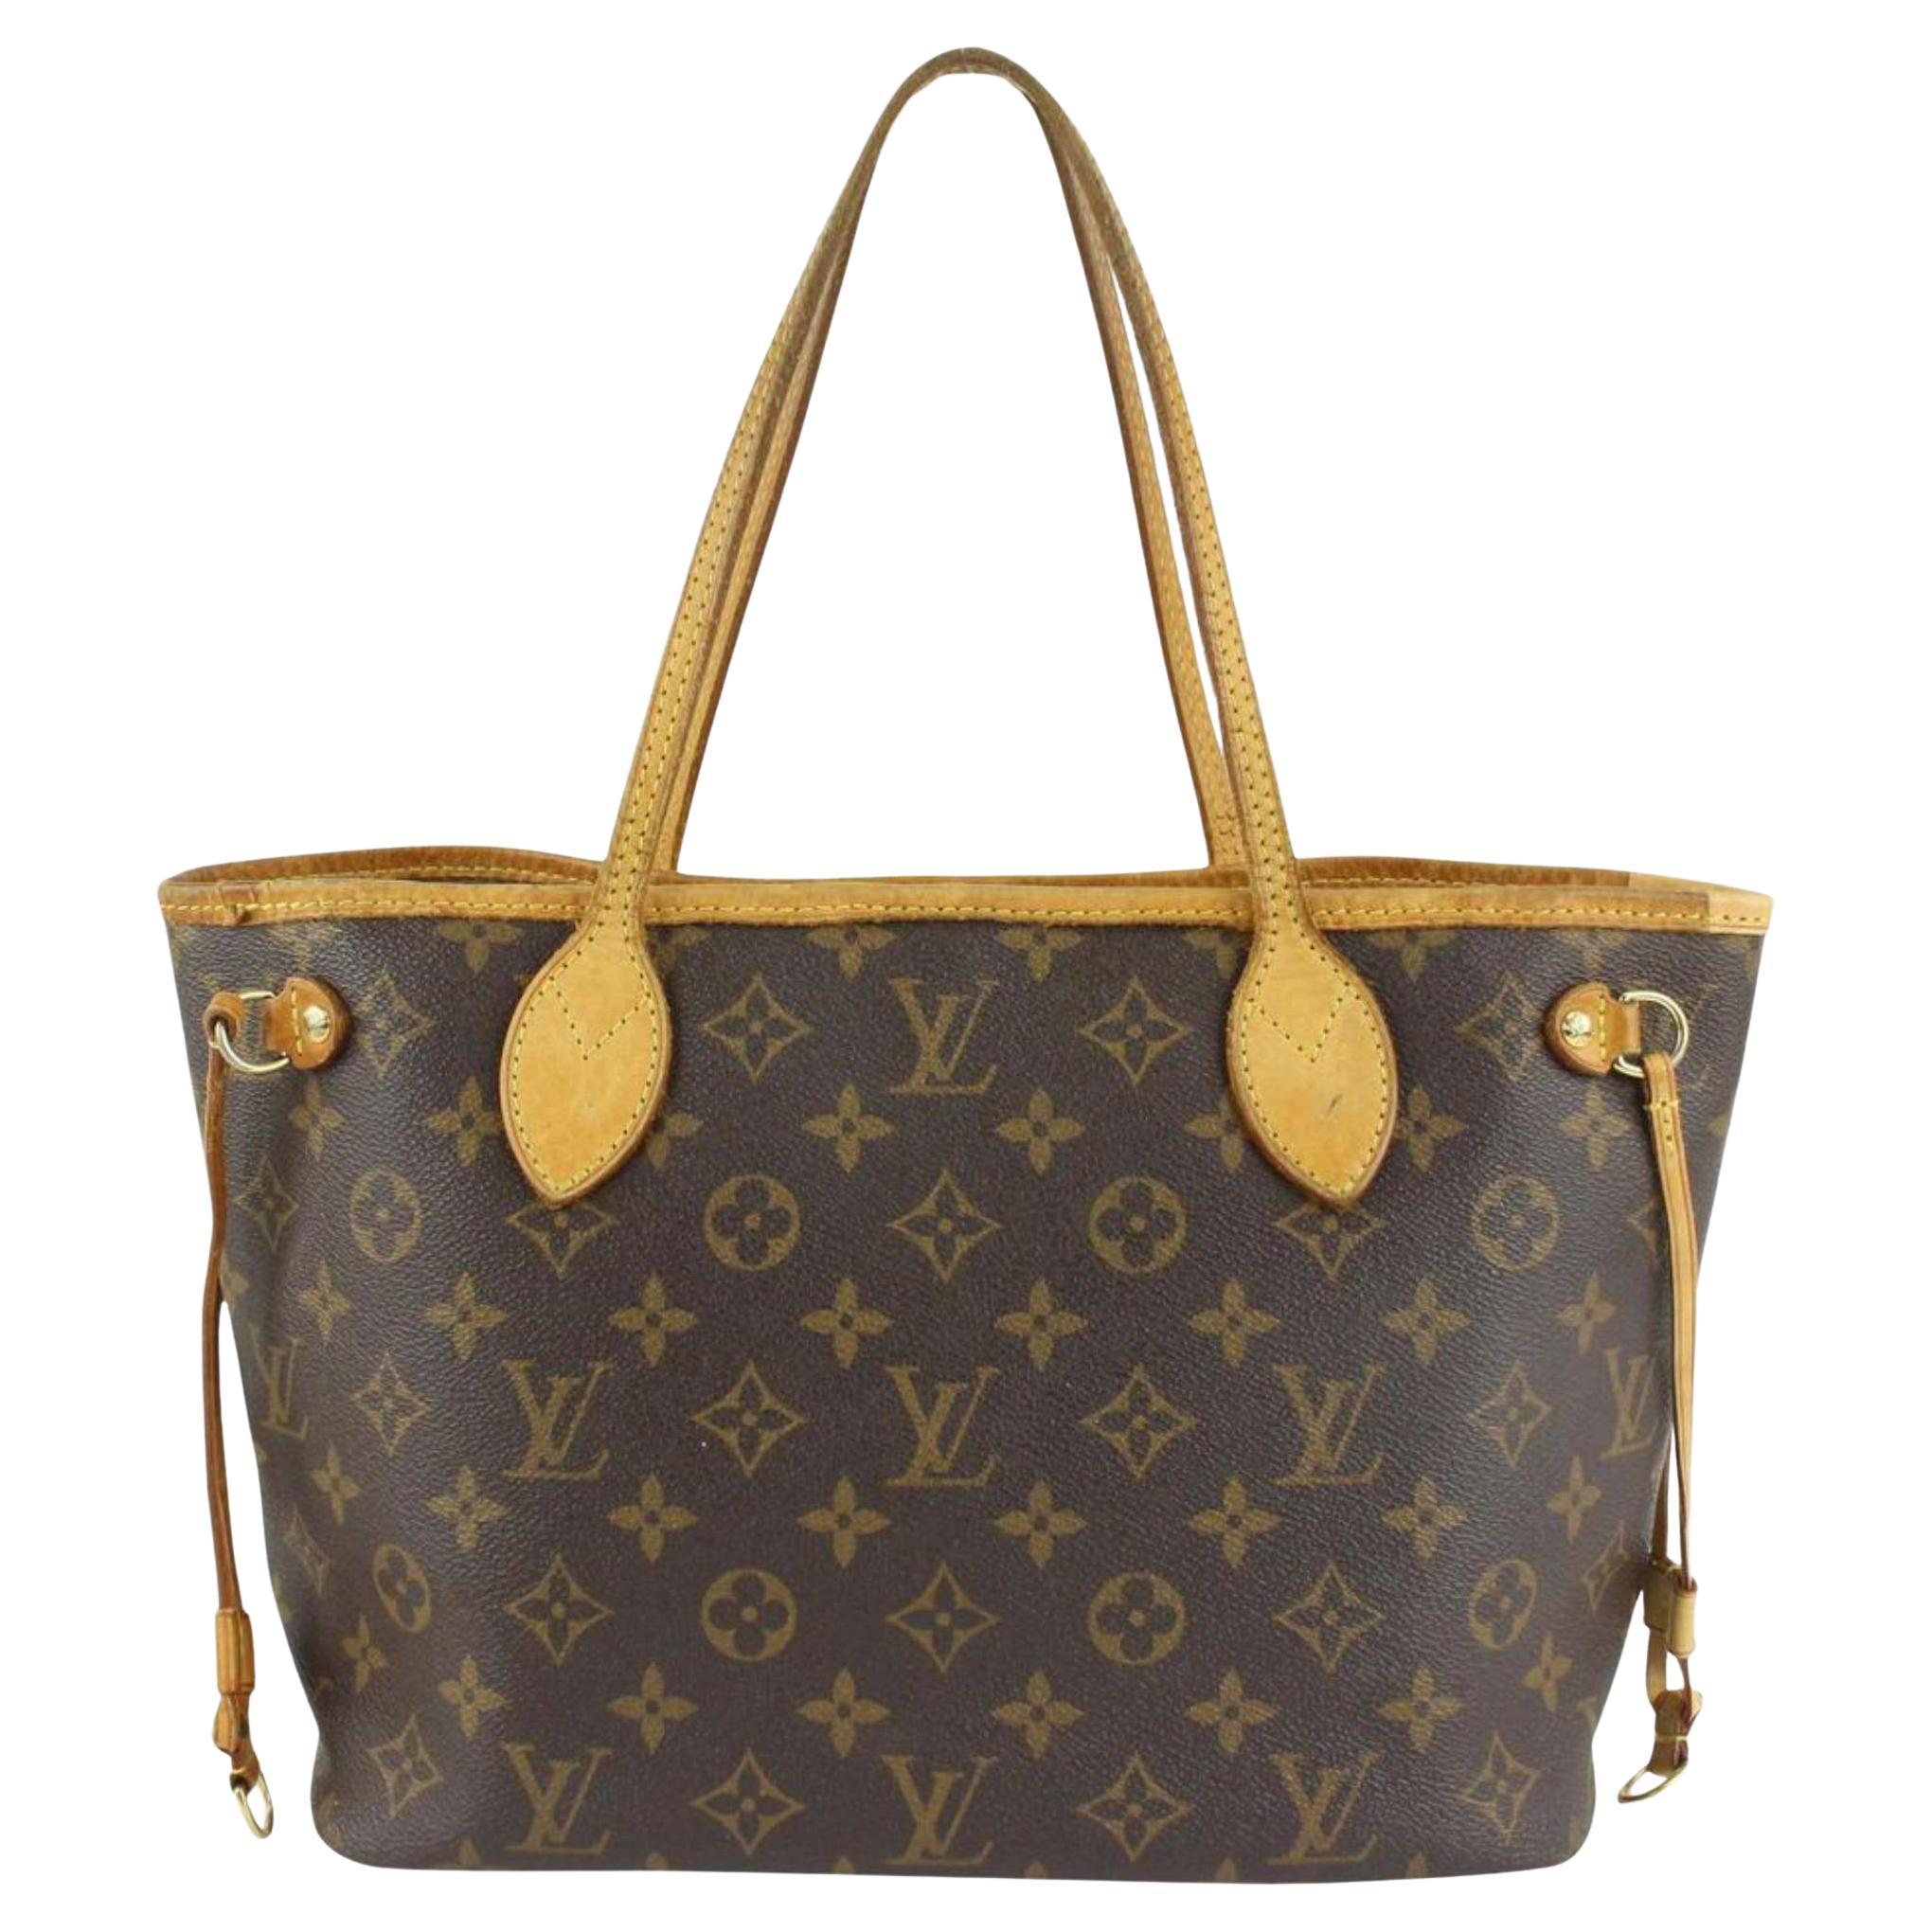 Louis Vuitton Small Monogram Neverfull PM Tote Bag 1215lv6 For Sale